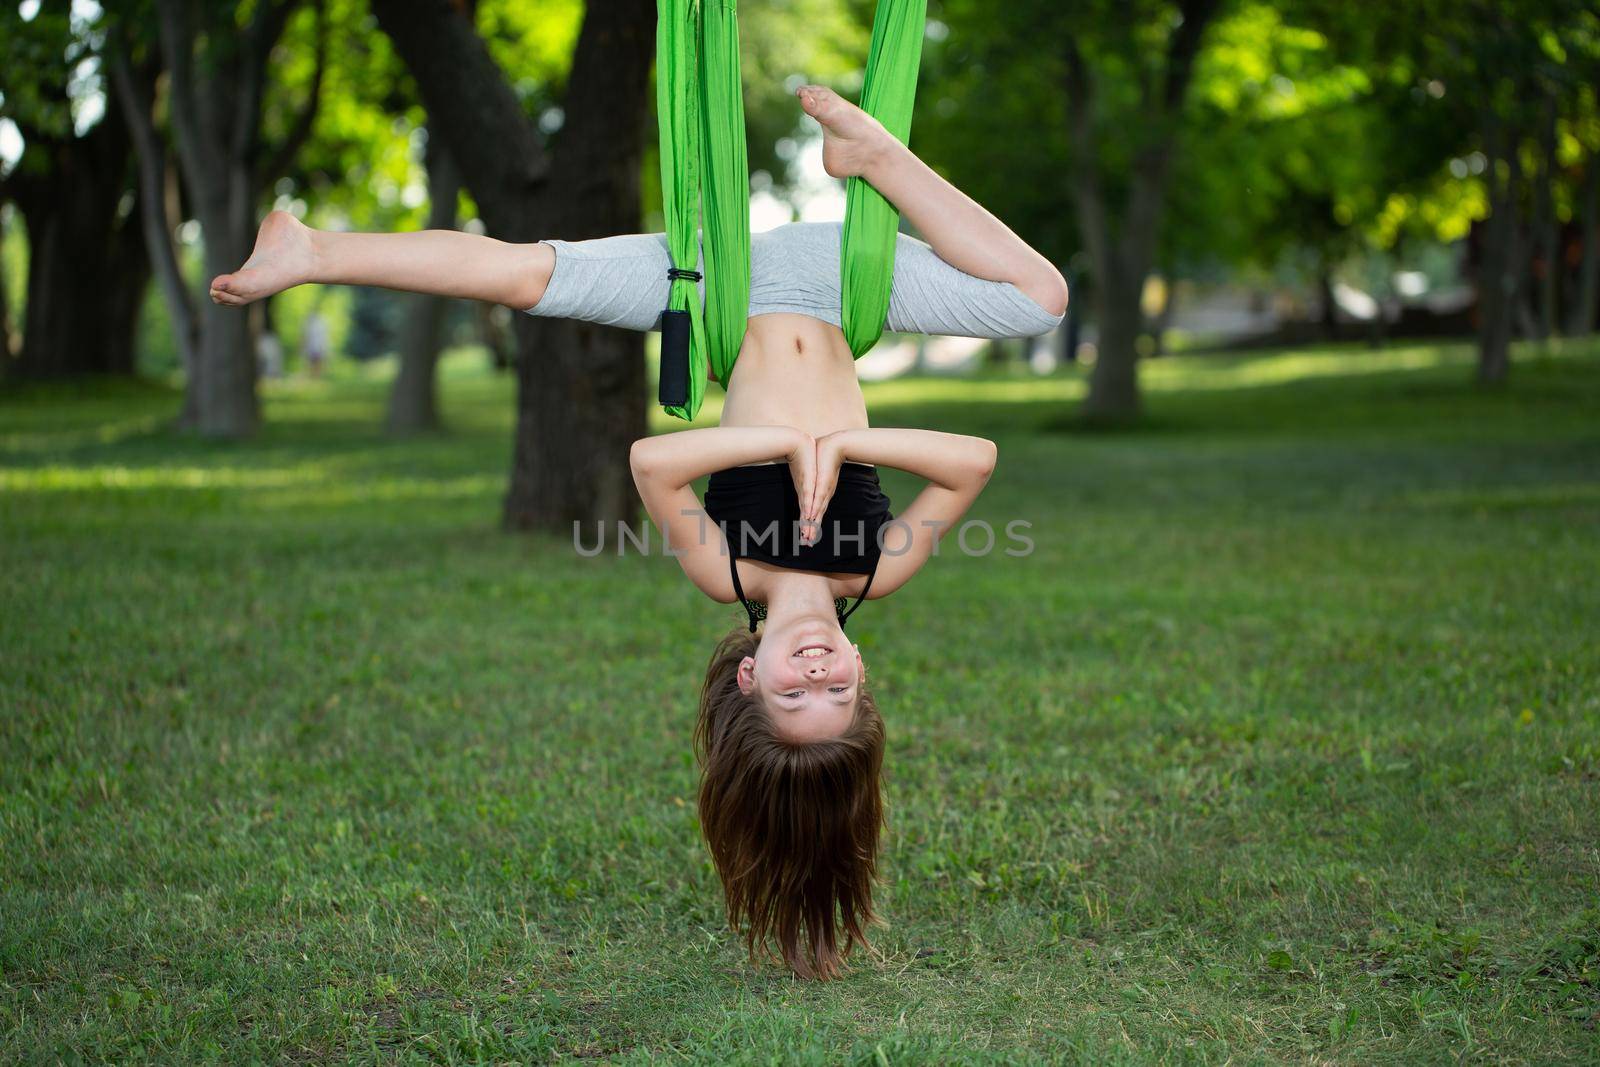 Little girl doing yoga exercises with a hammock in the park. by StudioPeace